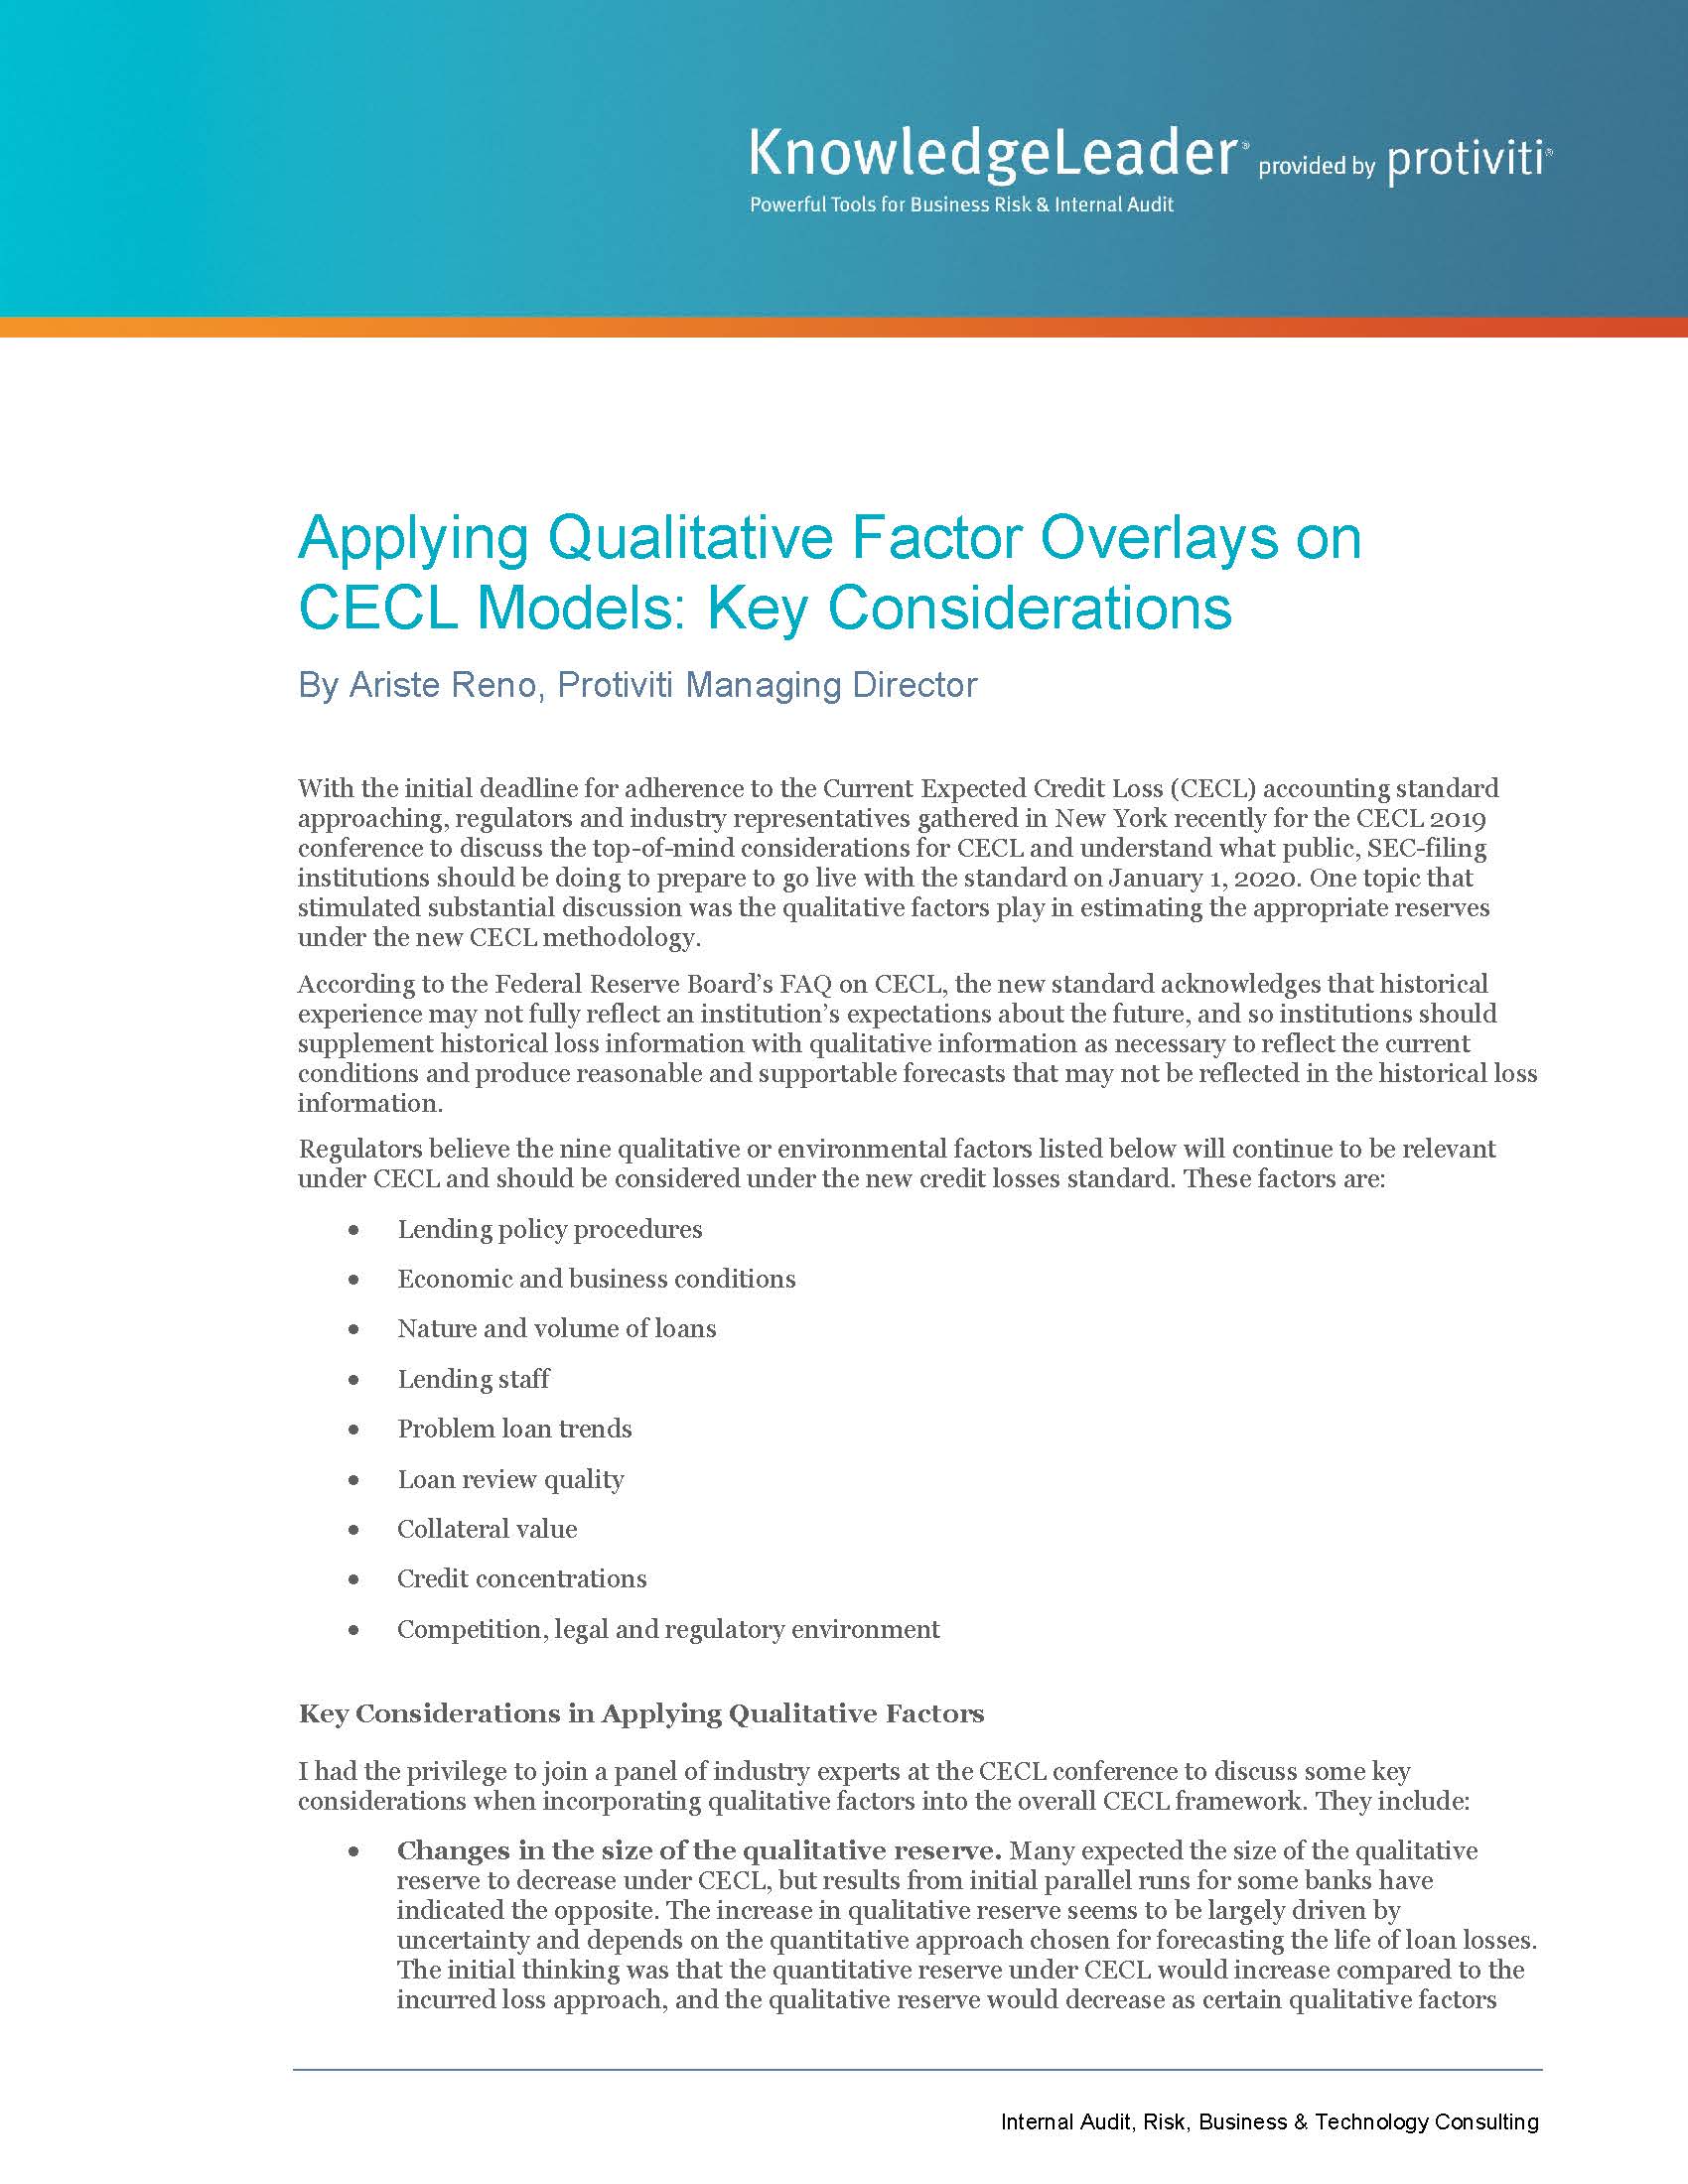 Screenshot of the first page of Applying Qualitative Factor Overlays on CECL Models Key Considerations